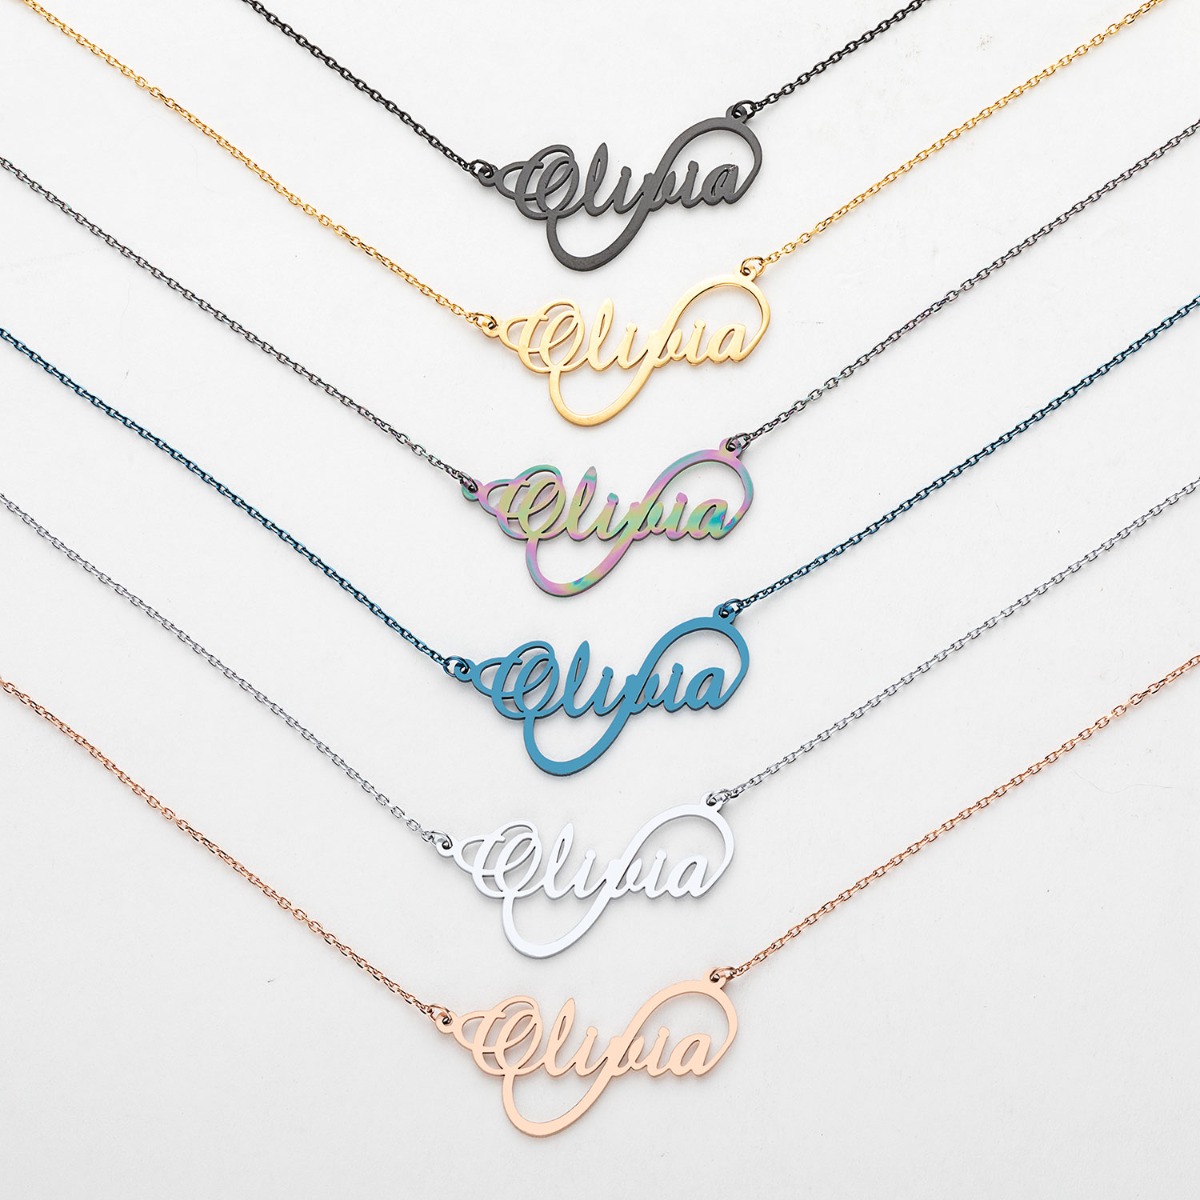 Stainless Steel Script Name Infinity Necklace